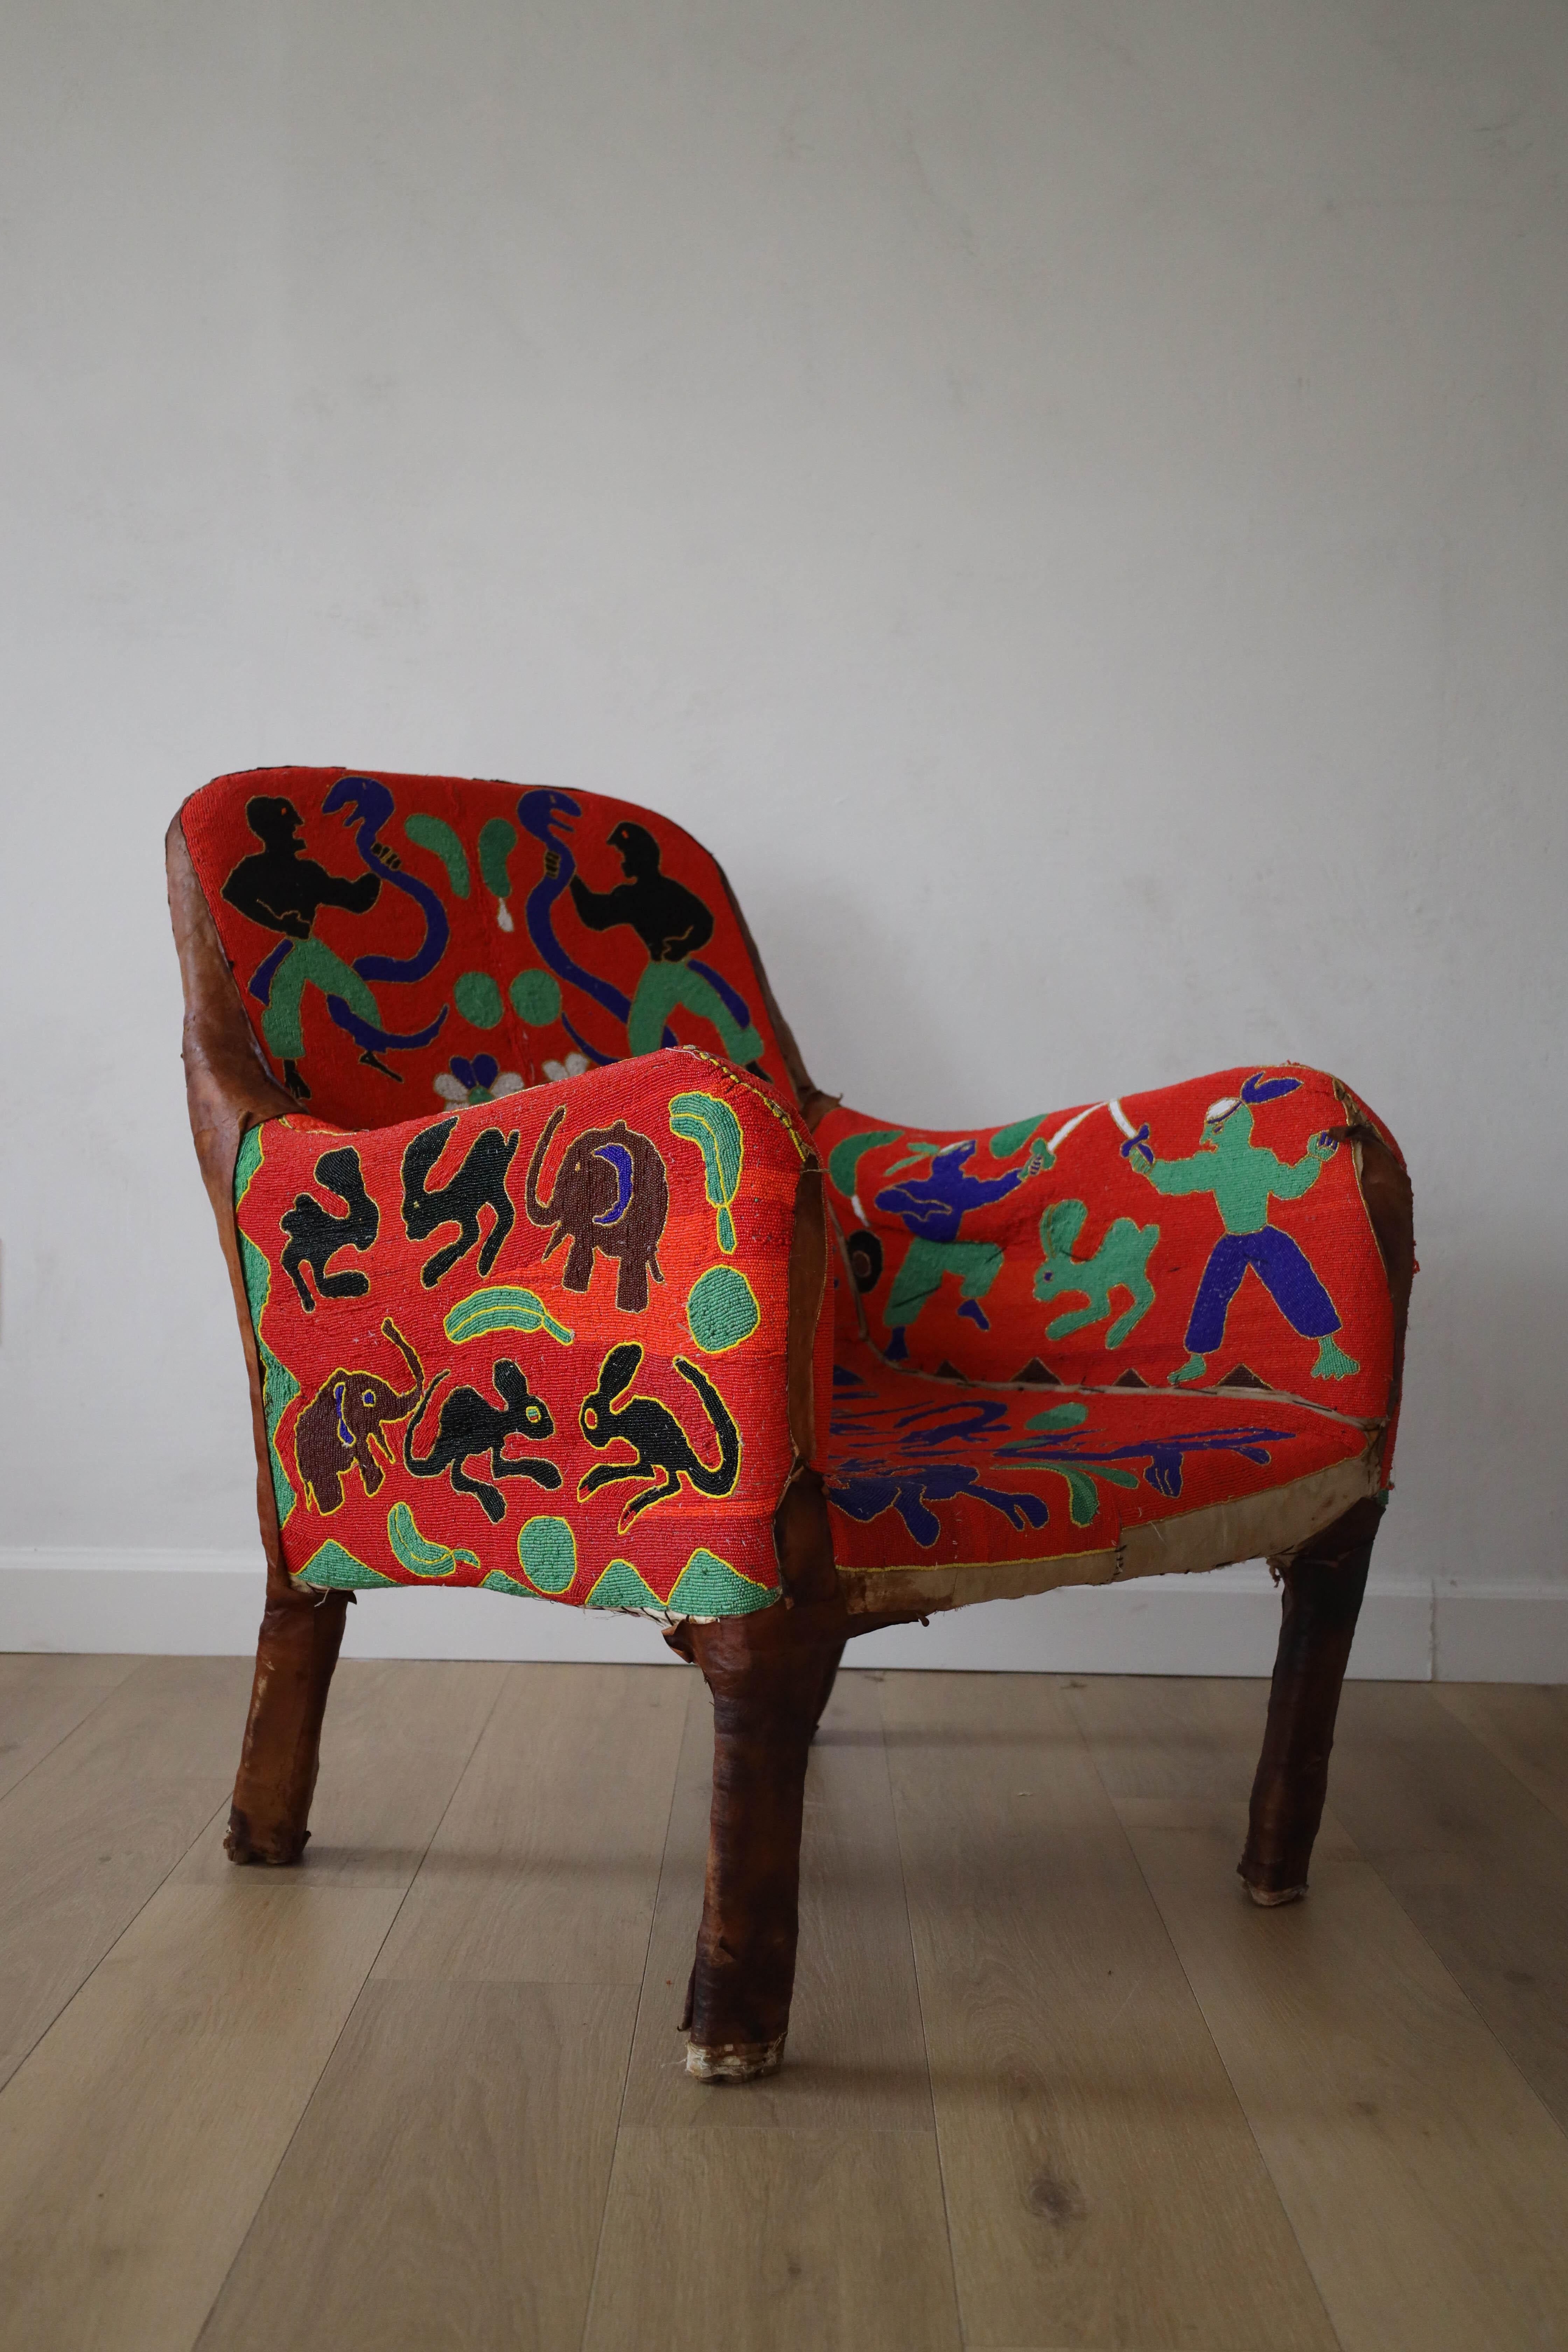 Feast your eyes on this piece of art: The Yoruba Chair. Originating in Nigeria, this chair is created with thousands of beads hand sewn on, taking an average of three months to complete. This particular Yoruba chair has a unique shape, pattern and